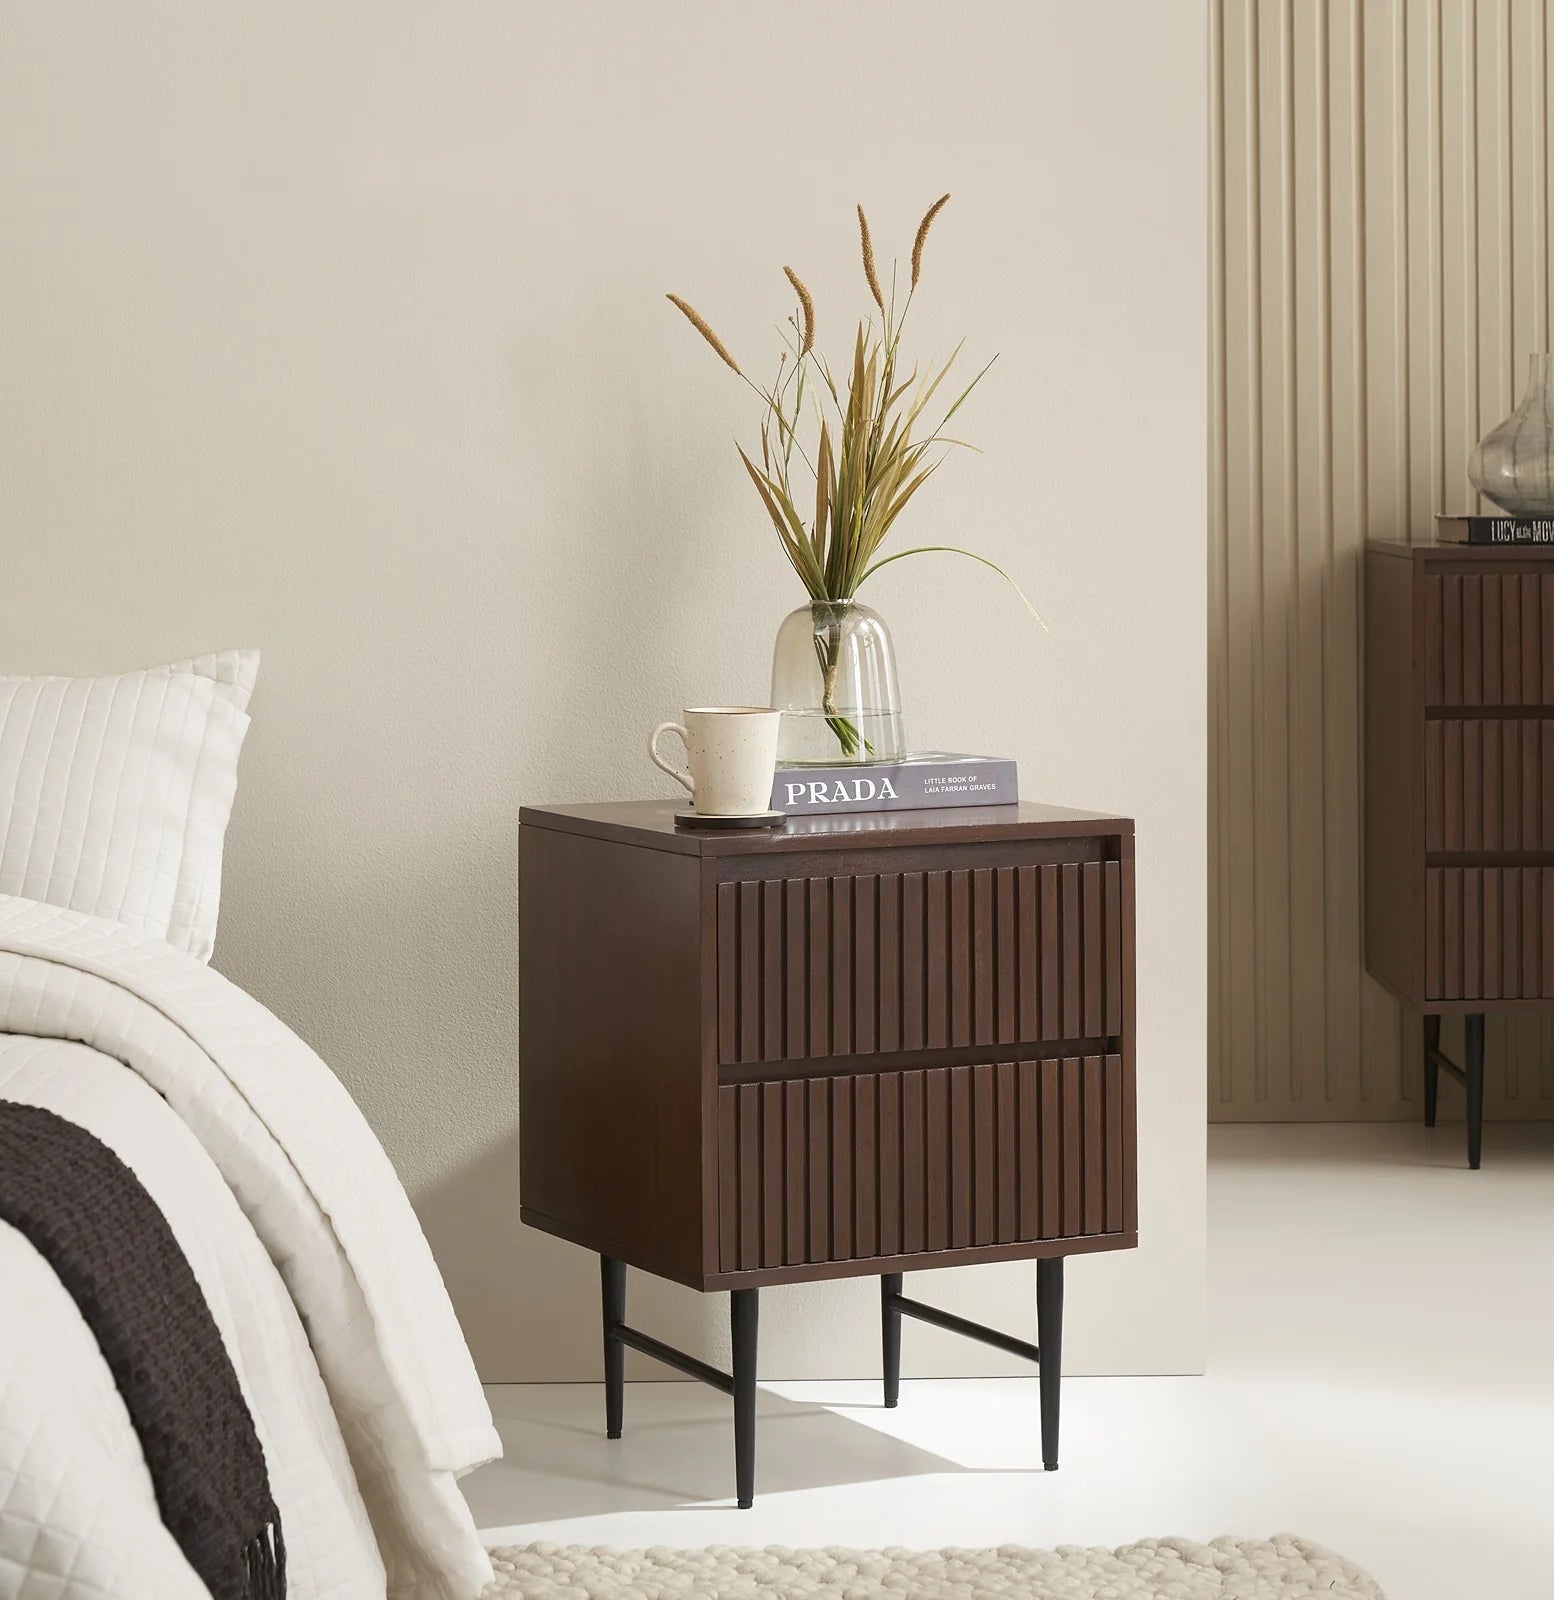 Maxim industrial dark walnut chest of drawers with 3 drawers and metal detailing | malletandplane.com